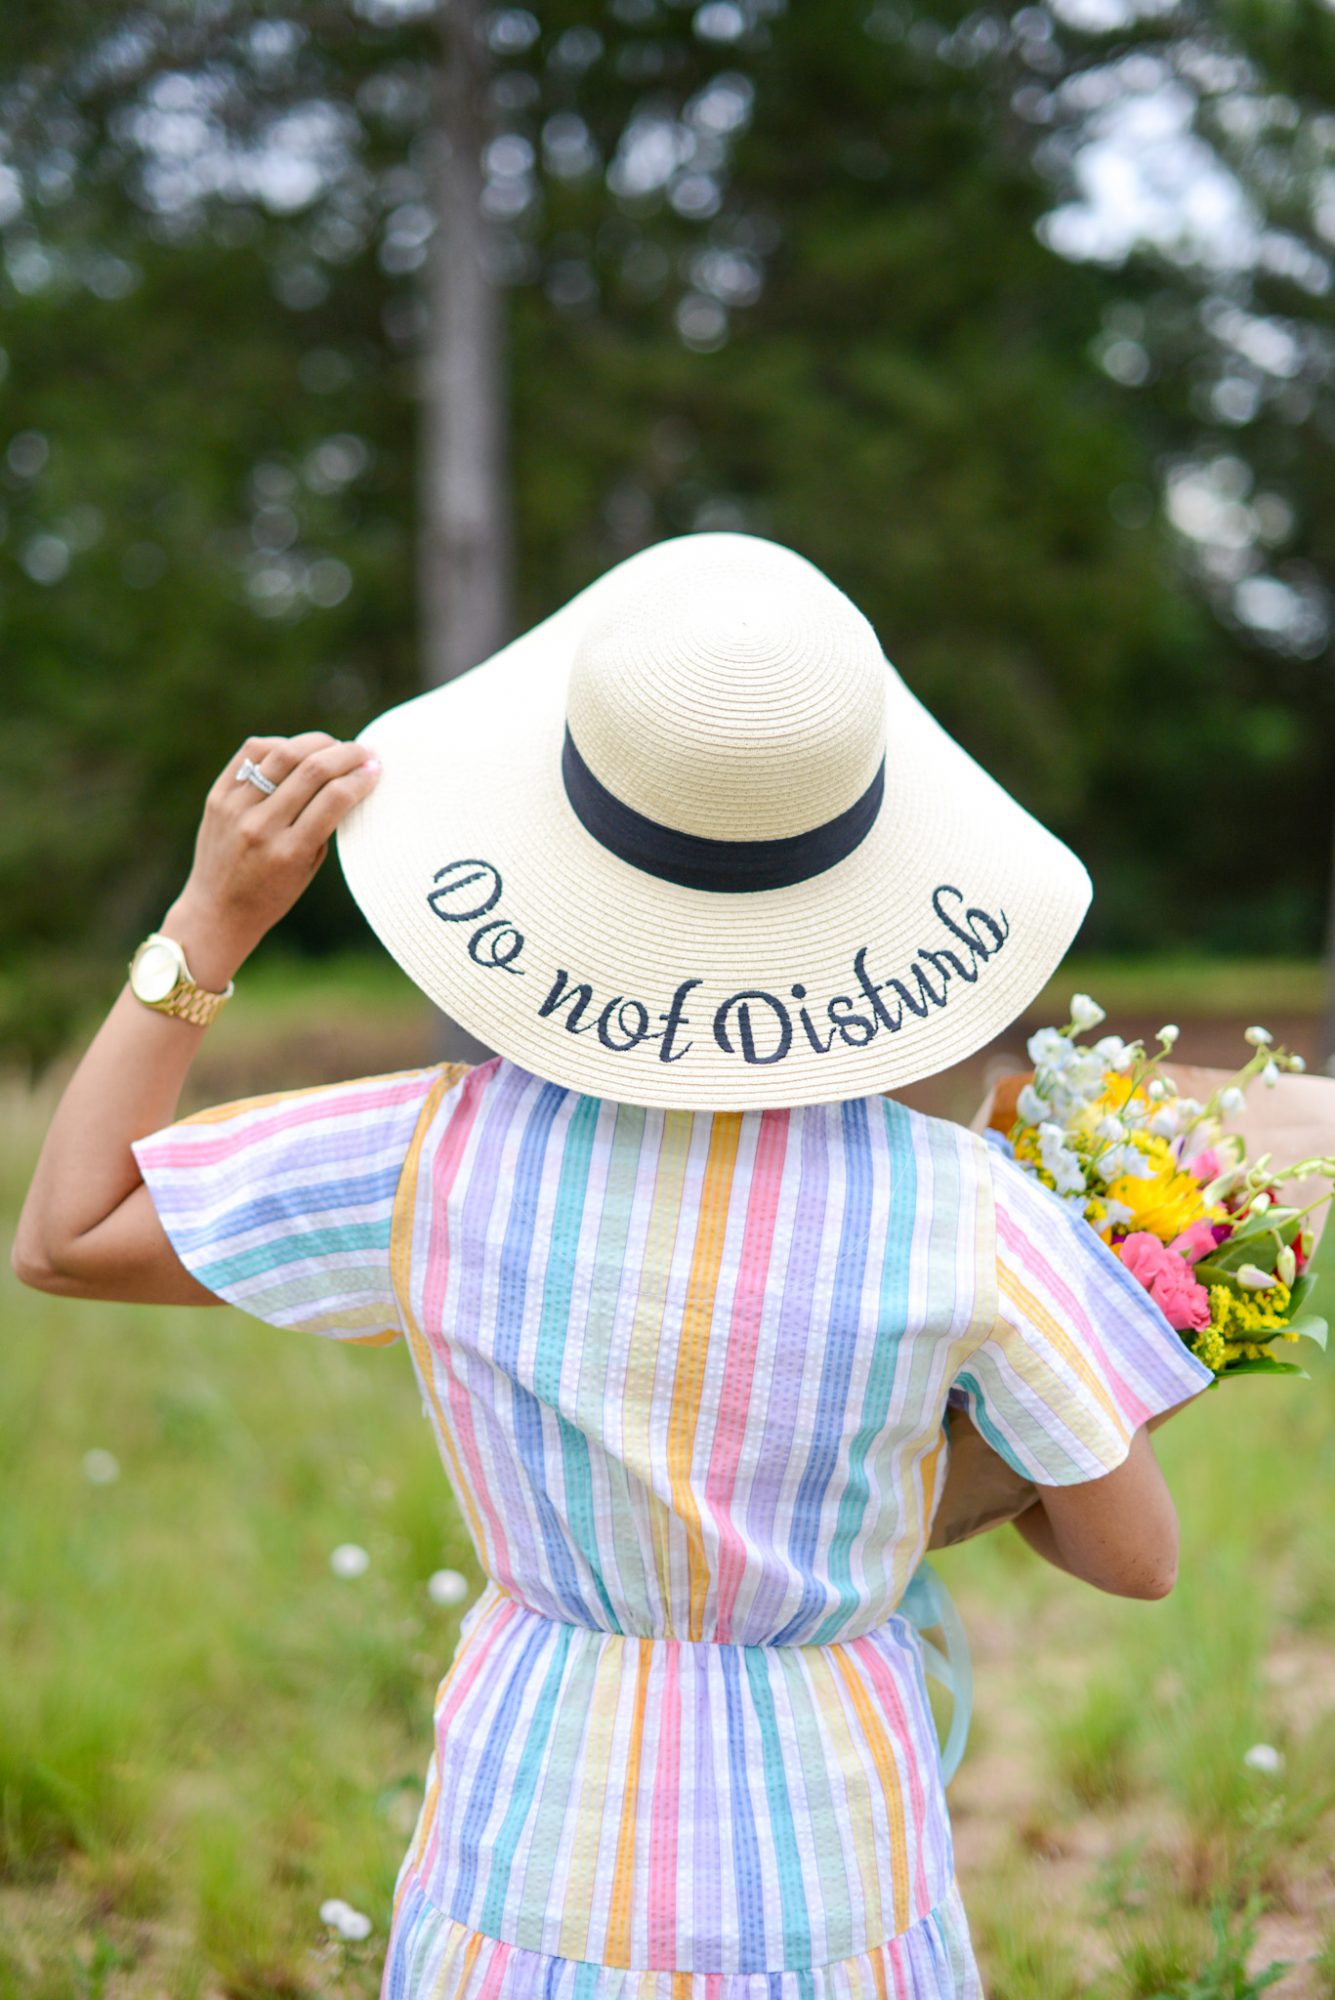 woman wearing a weaved hat with do not disturb text